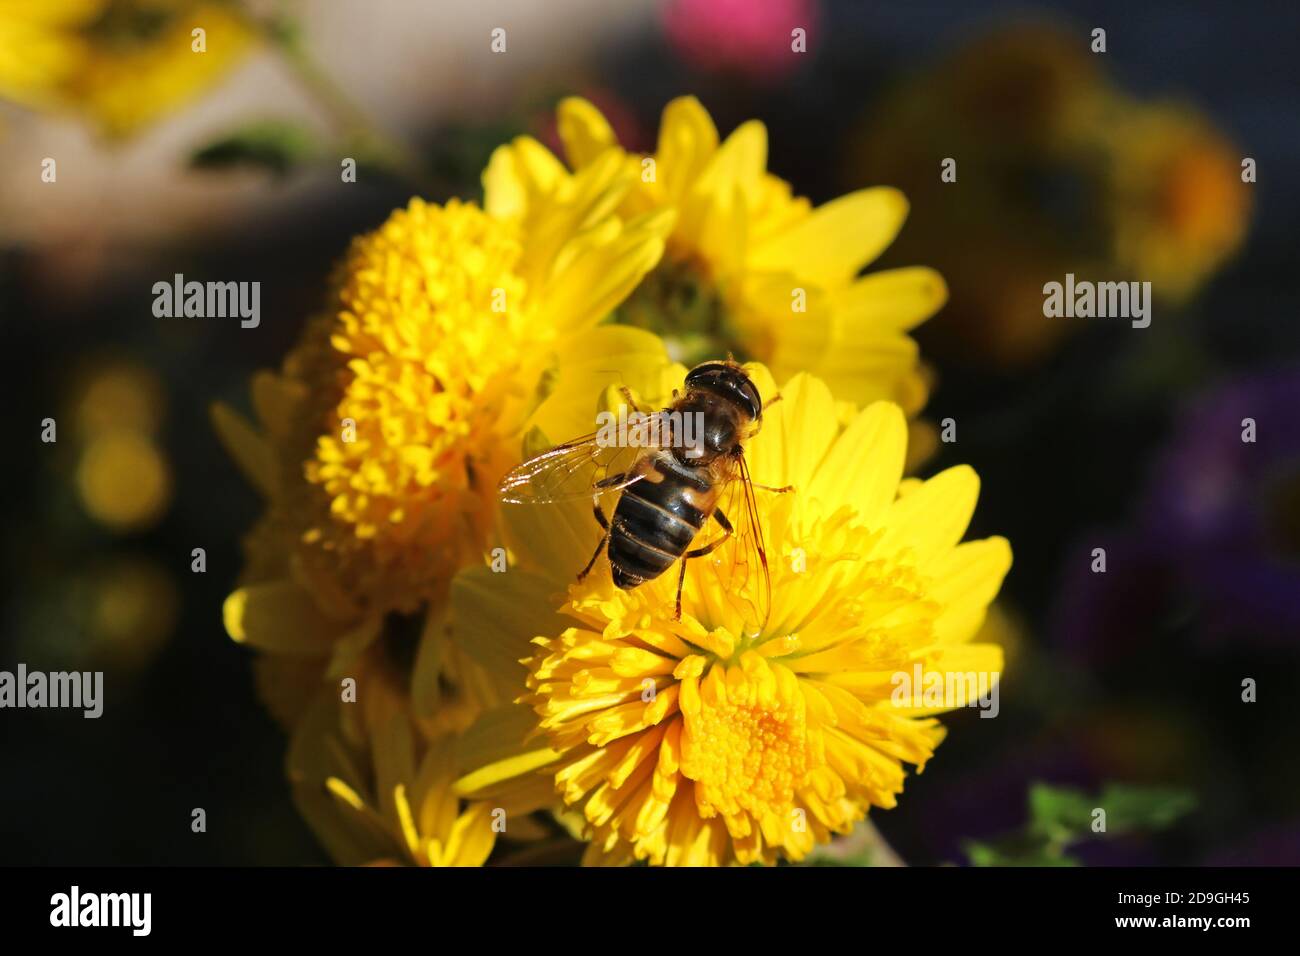 A bee on a yellow flower Stock Photo